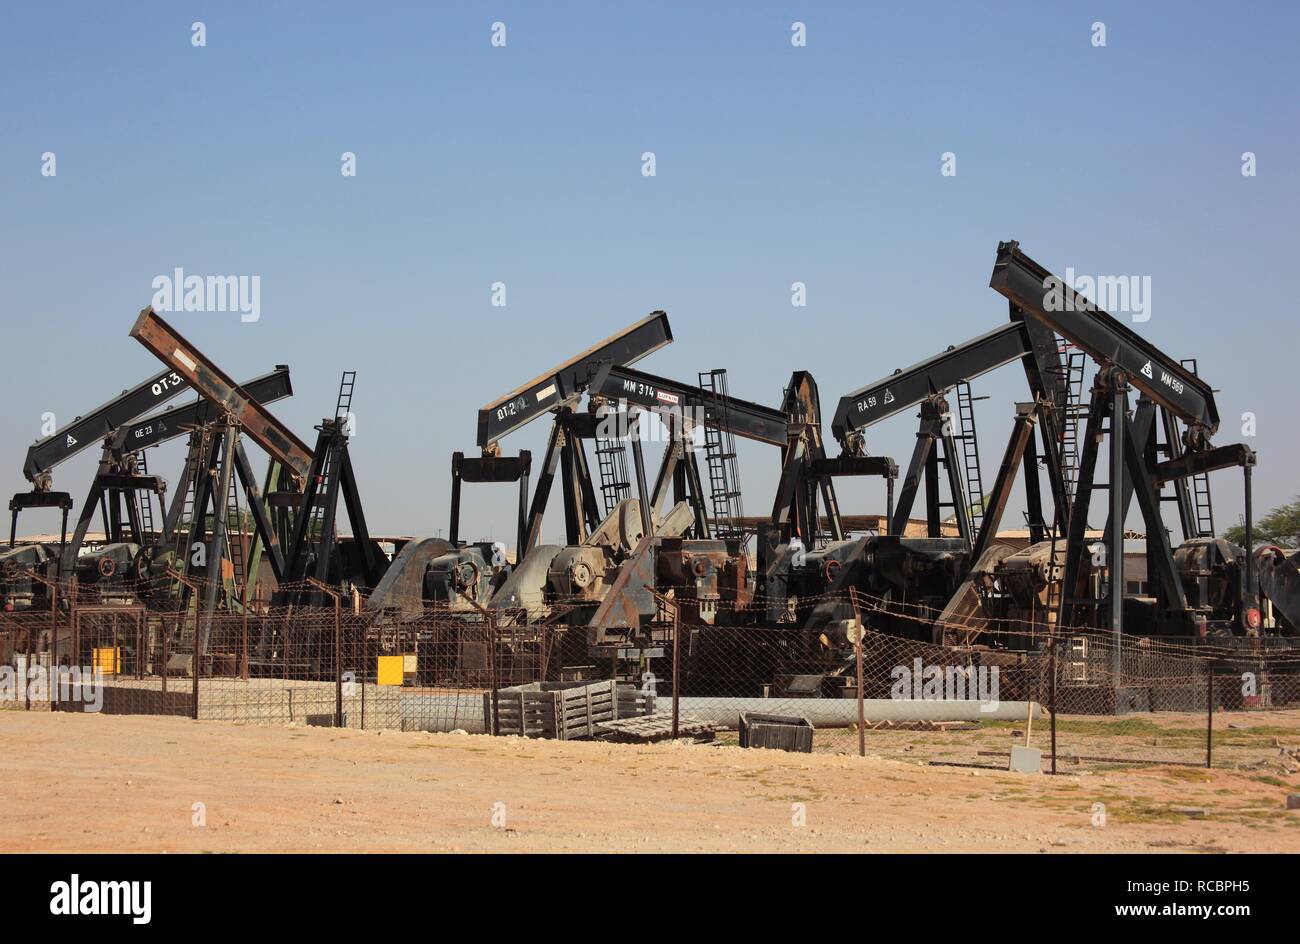 Depot with worn-out oil pumps near Marmul, Oman, Arabian Peninsula, Middle East, Asia Stock Photo